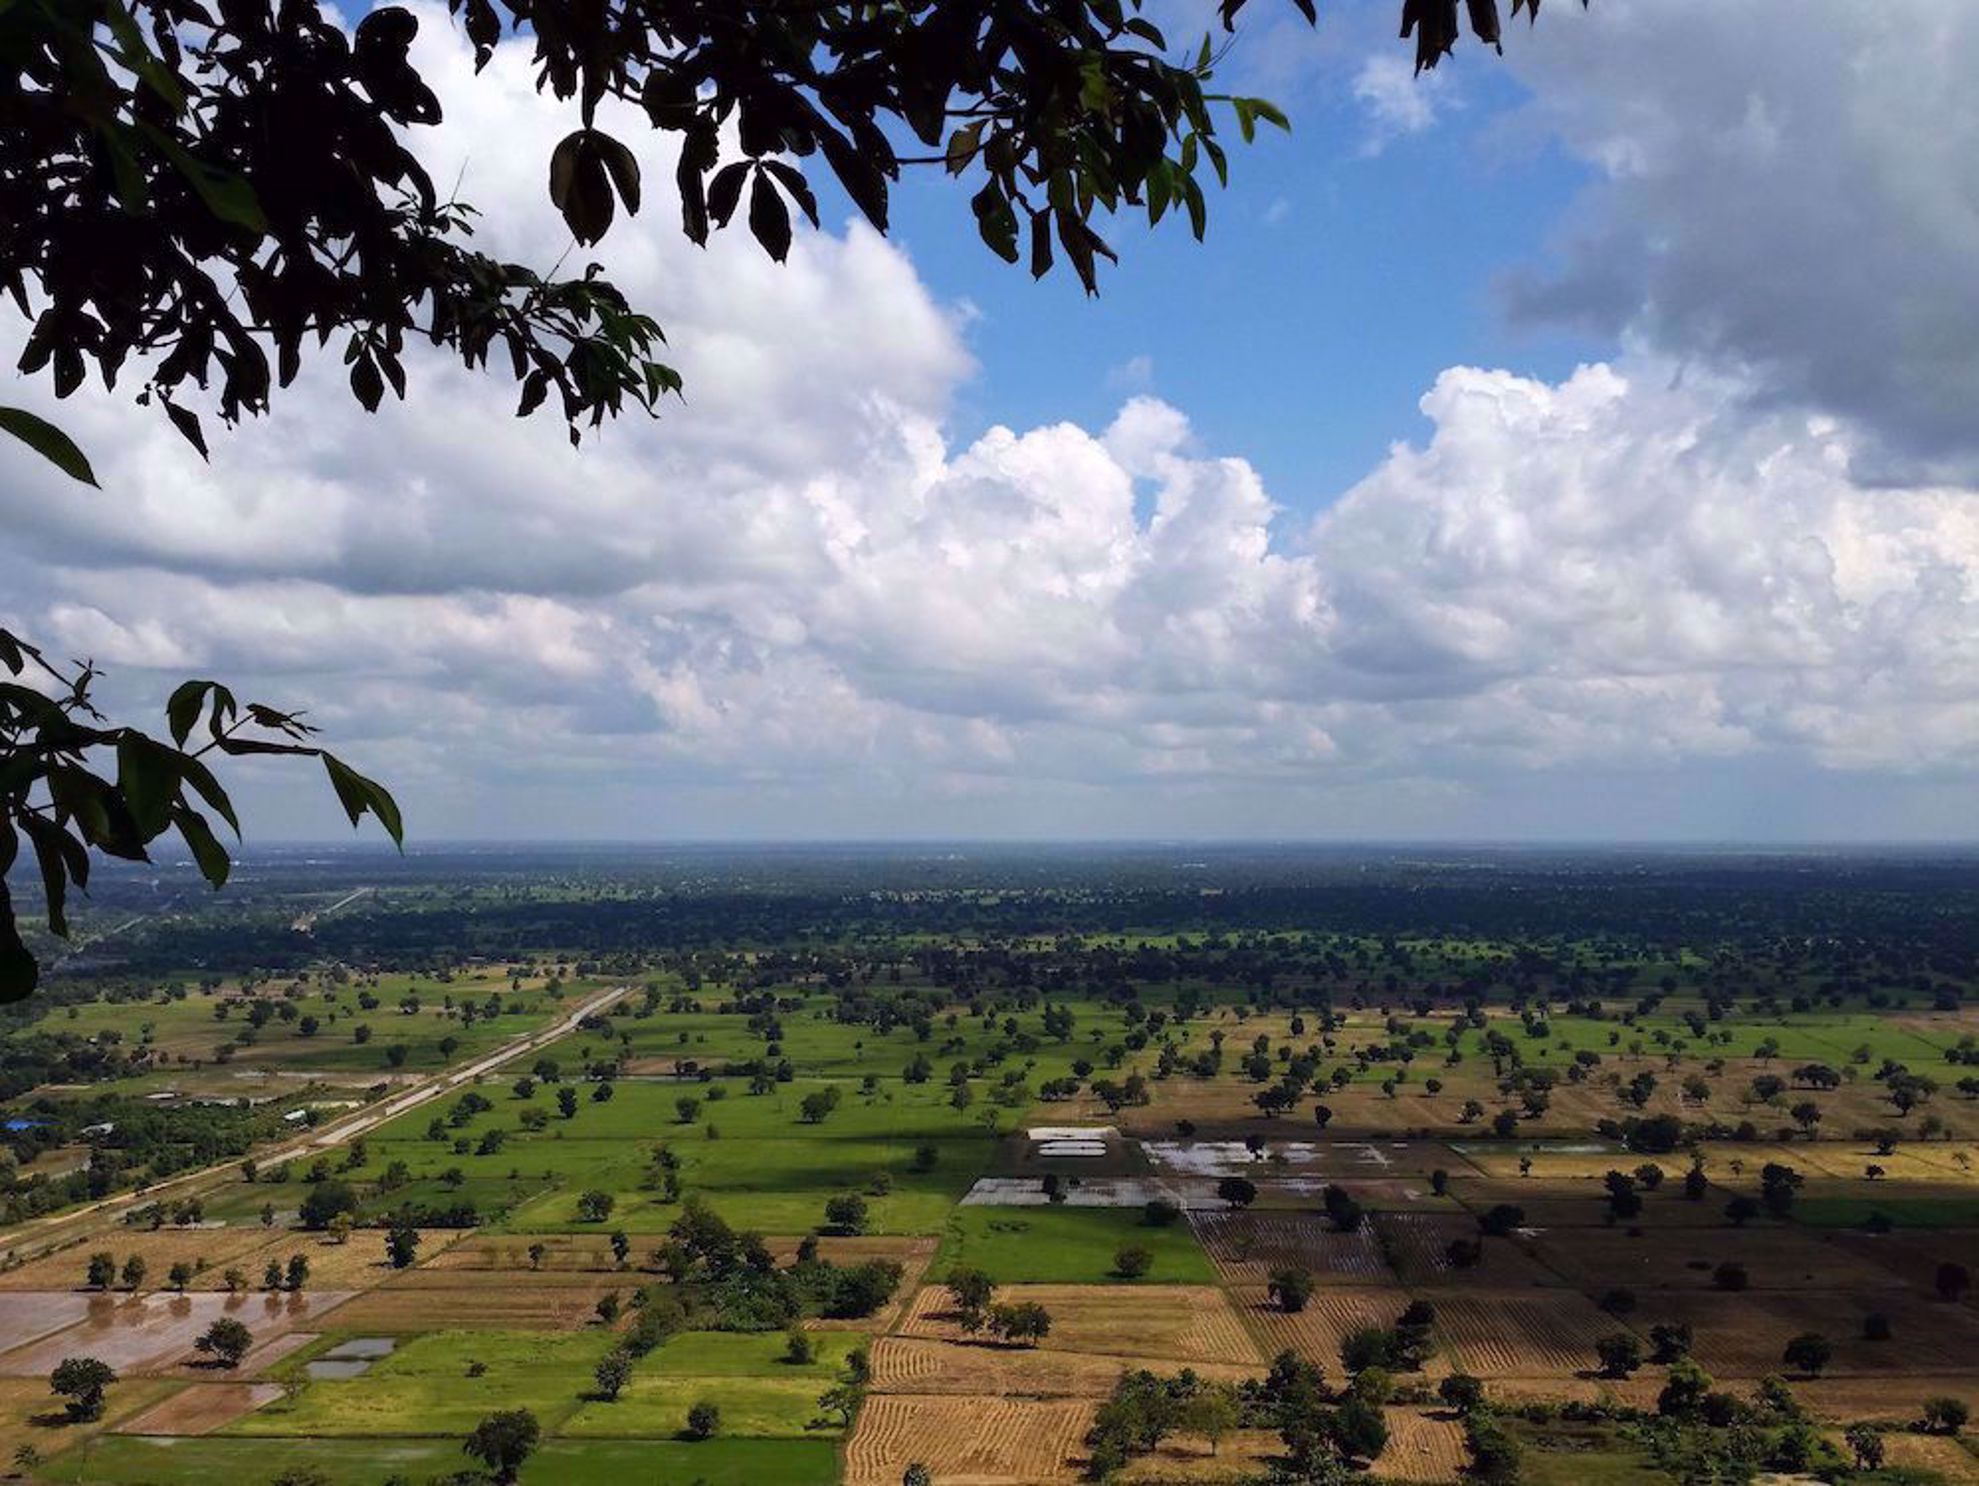 The plains and farms in Cambodia